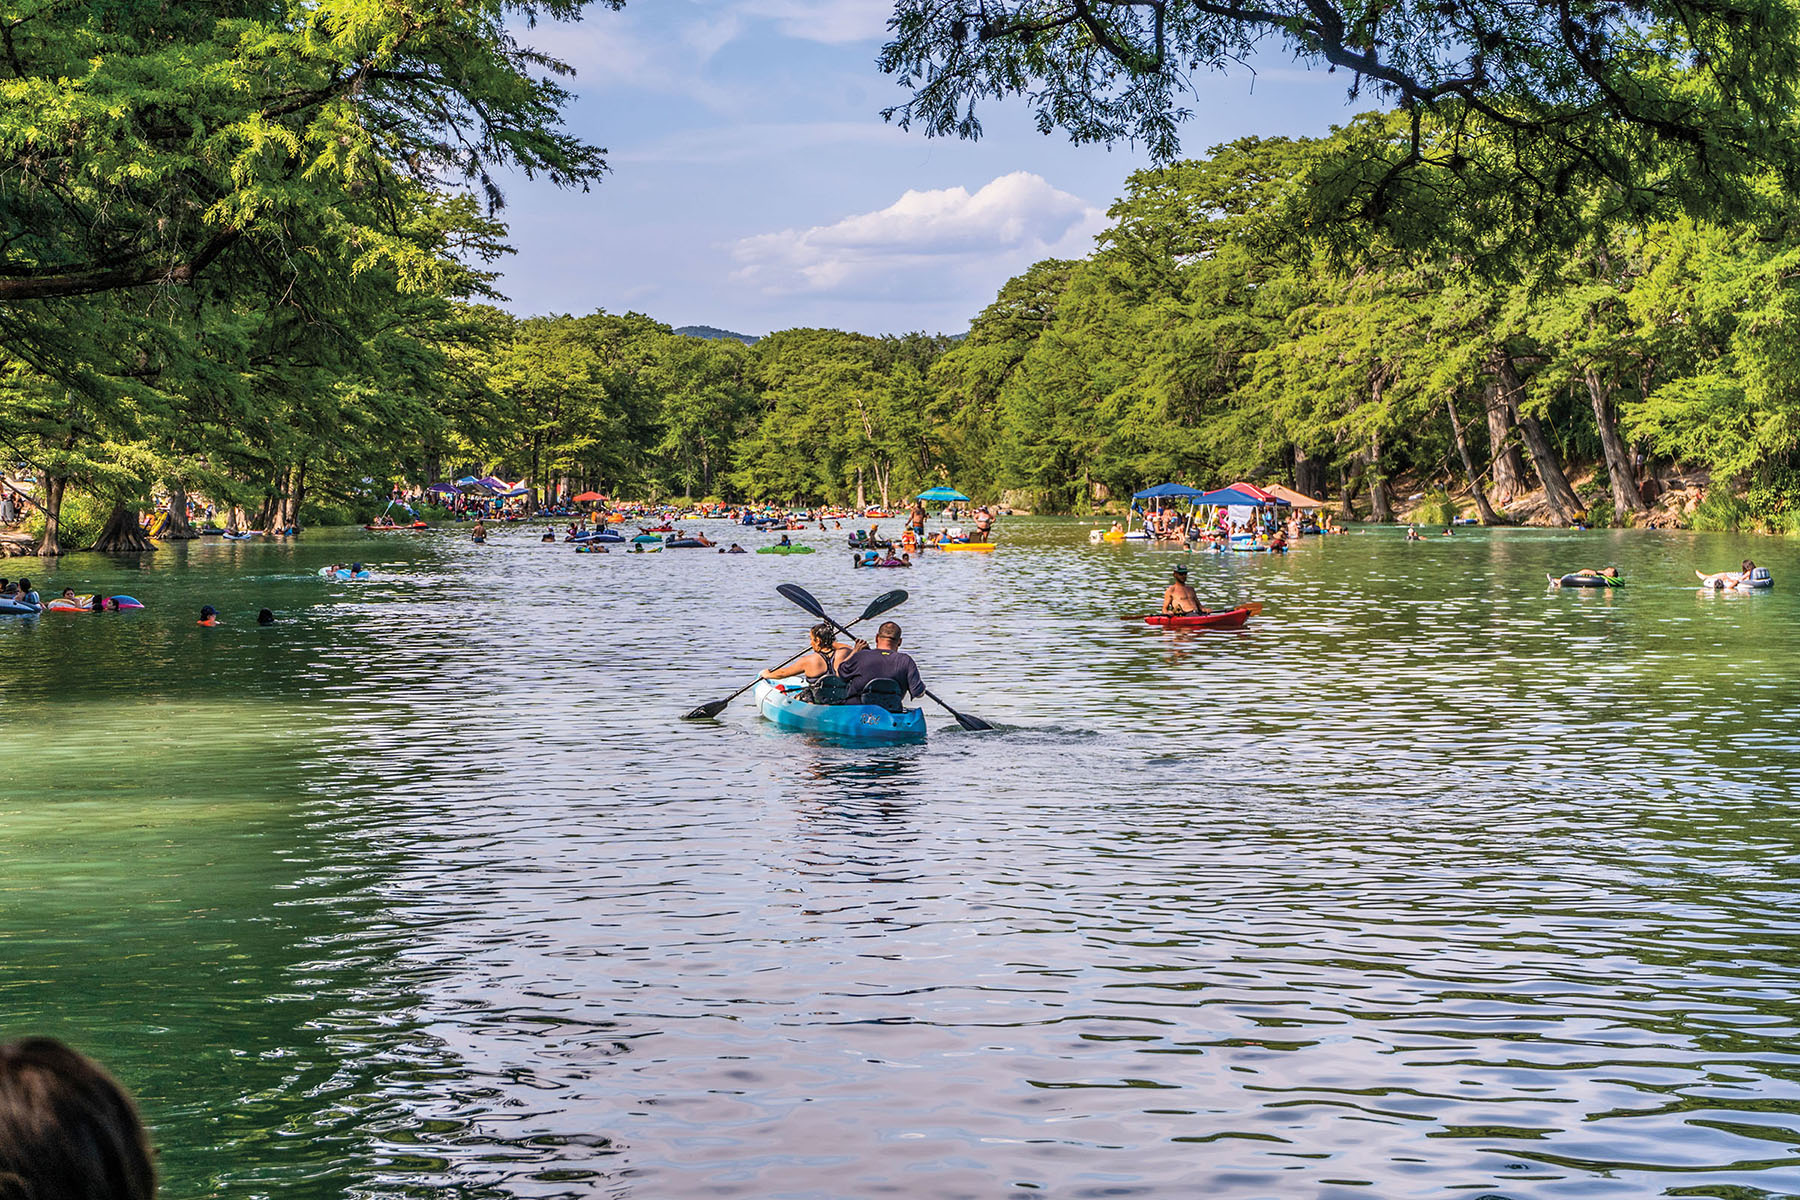 A group of people kayak and canoe on clear water beneath green trees